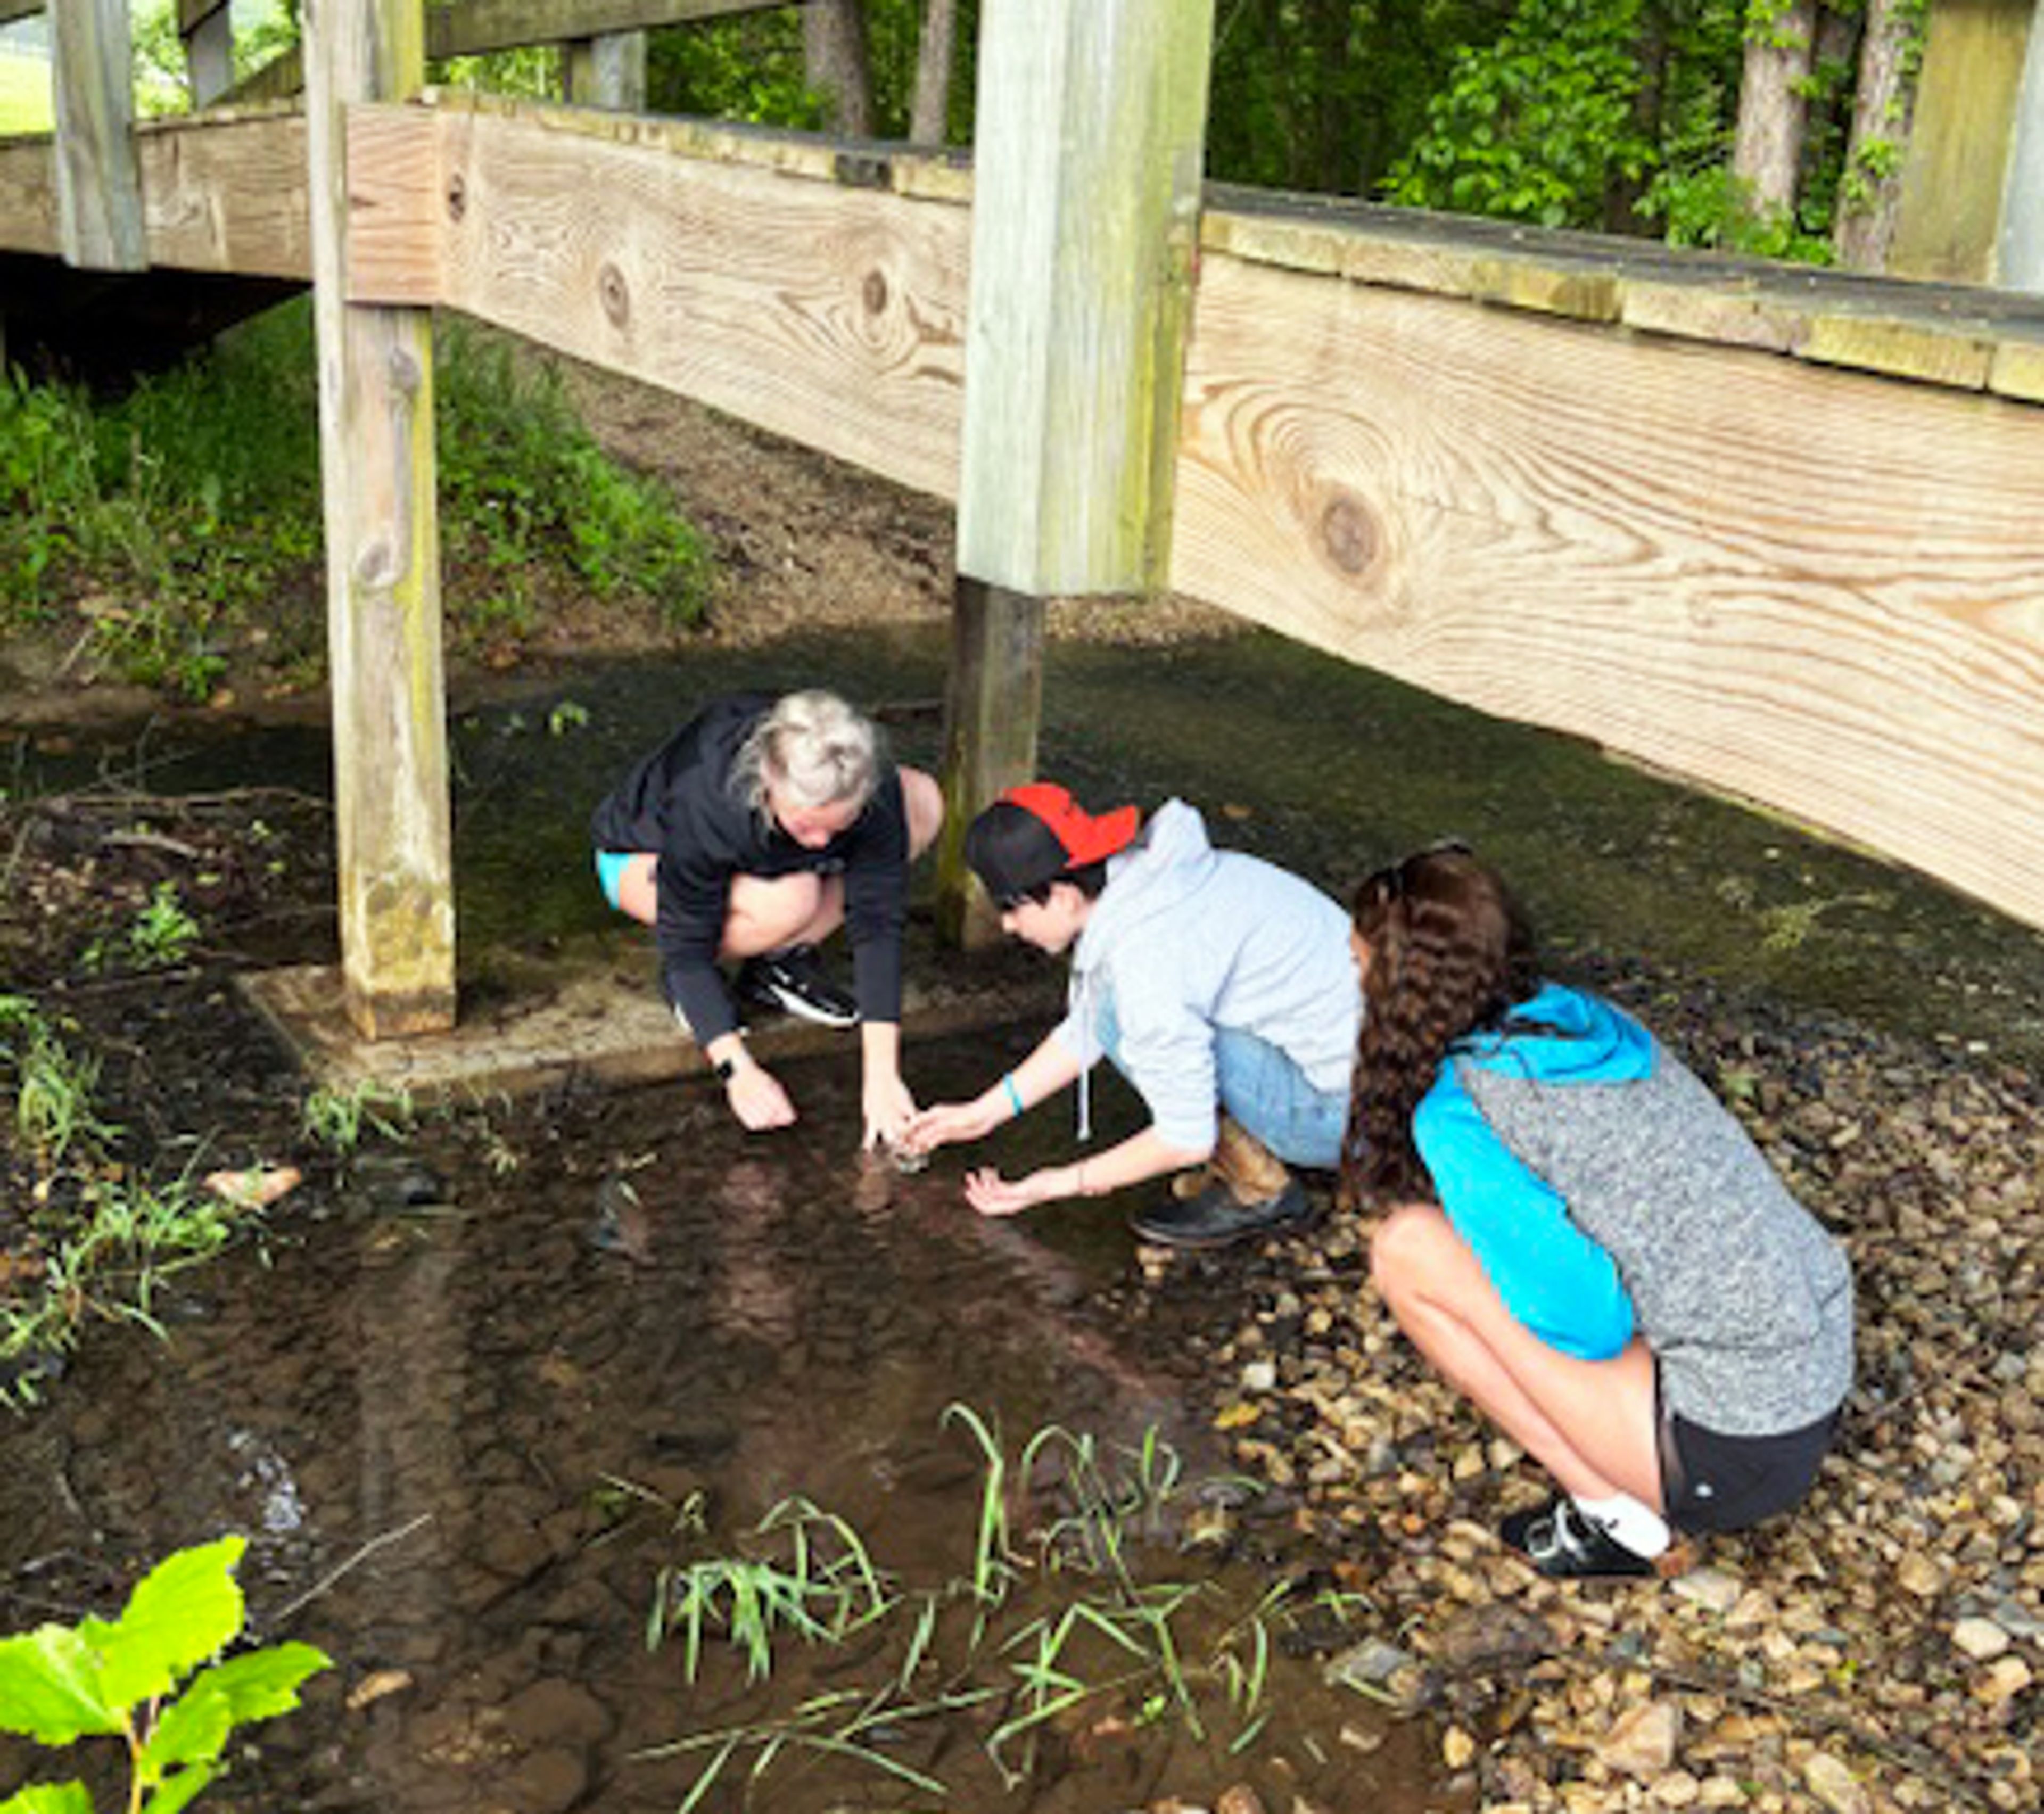 Woodland students in Kaitlin Prasanphanich’s biology class take samples from the creek behind the school to investigate them for microscopic life. When the students were finished, they returned their samples to their habitat.